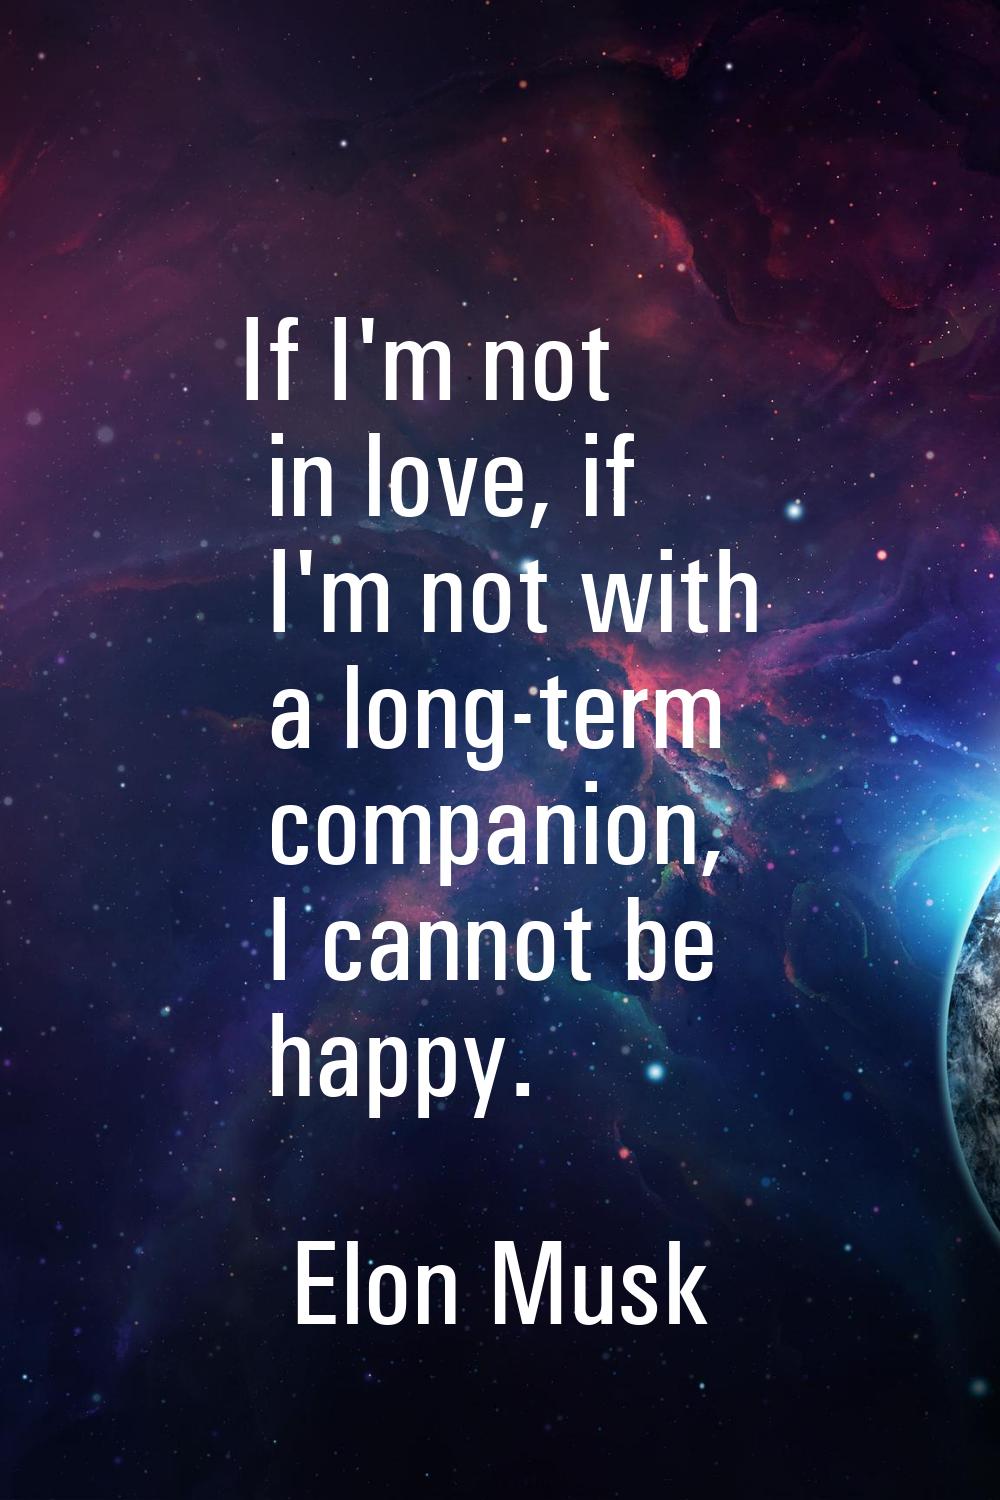 If I'm not in love, if I'm not with a long-term companion, I cannot be happy.